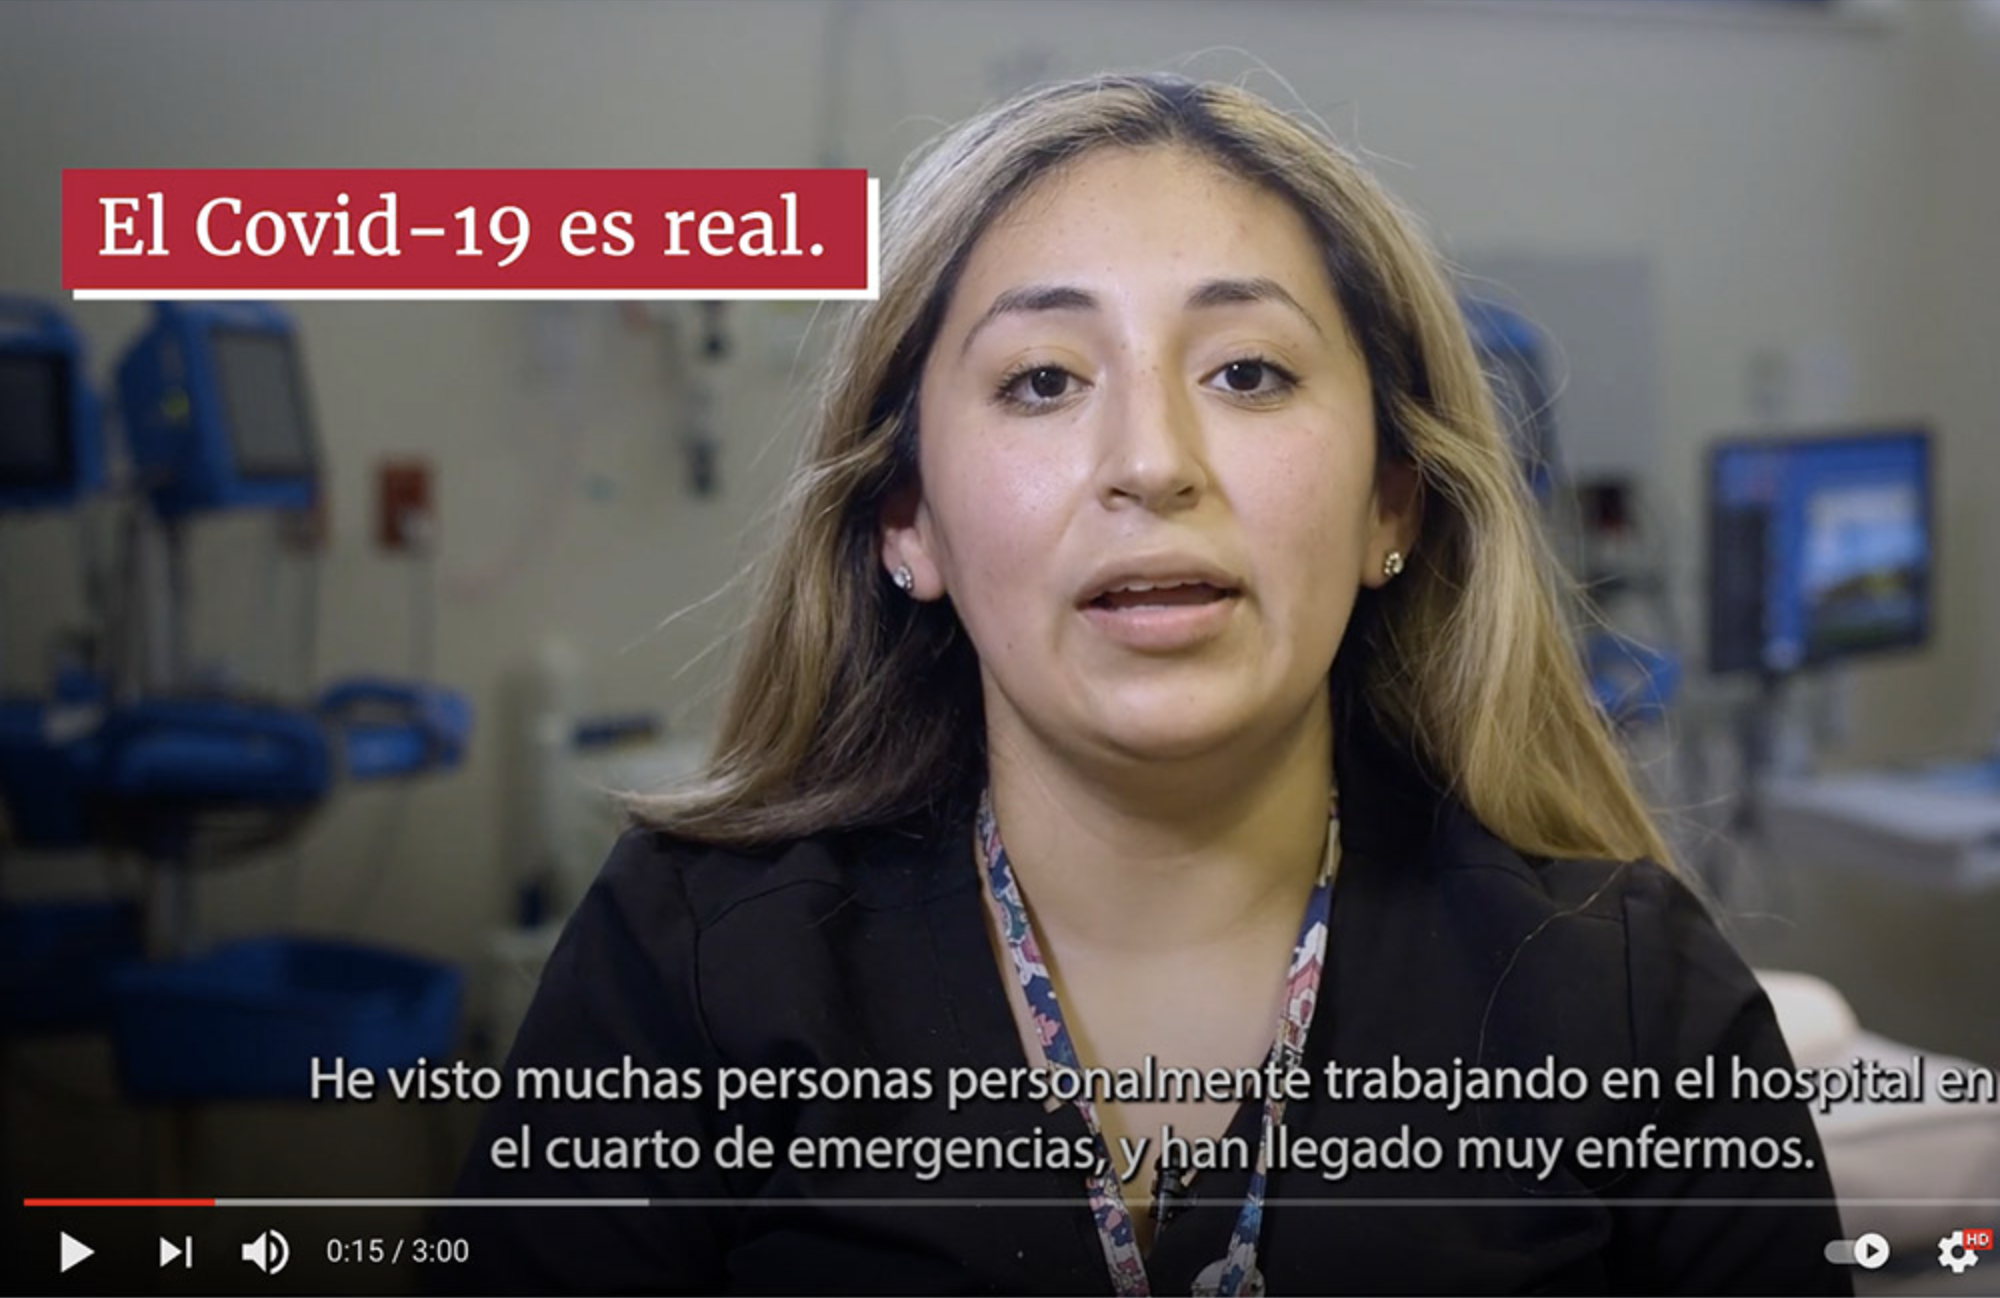 The first phase of the EXCITE initiative is to create a communications campaign using testimonial videos. In the videos, provided in both Spanish and English, community members offer firsthand accounts of why they got the vaccine to encourage others to get vaccinated.